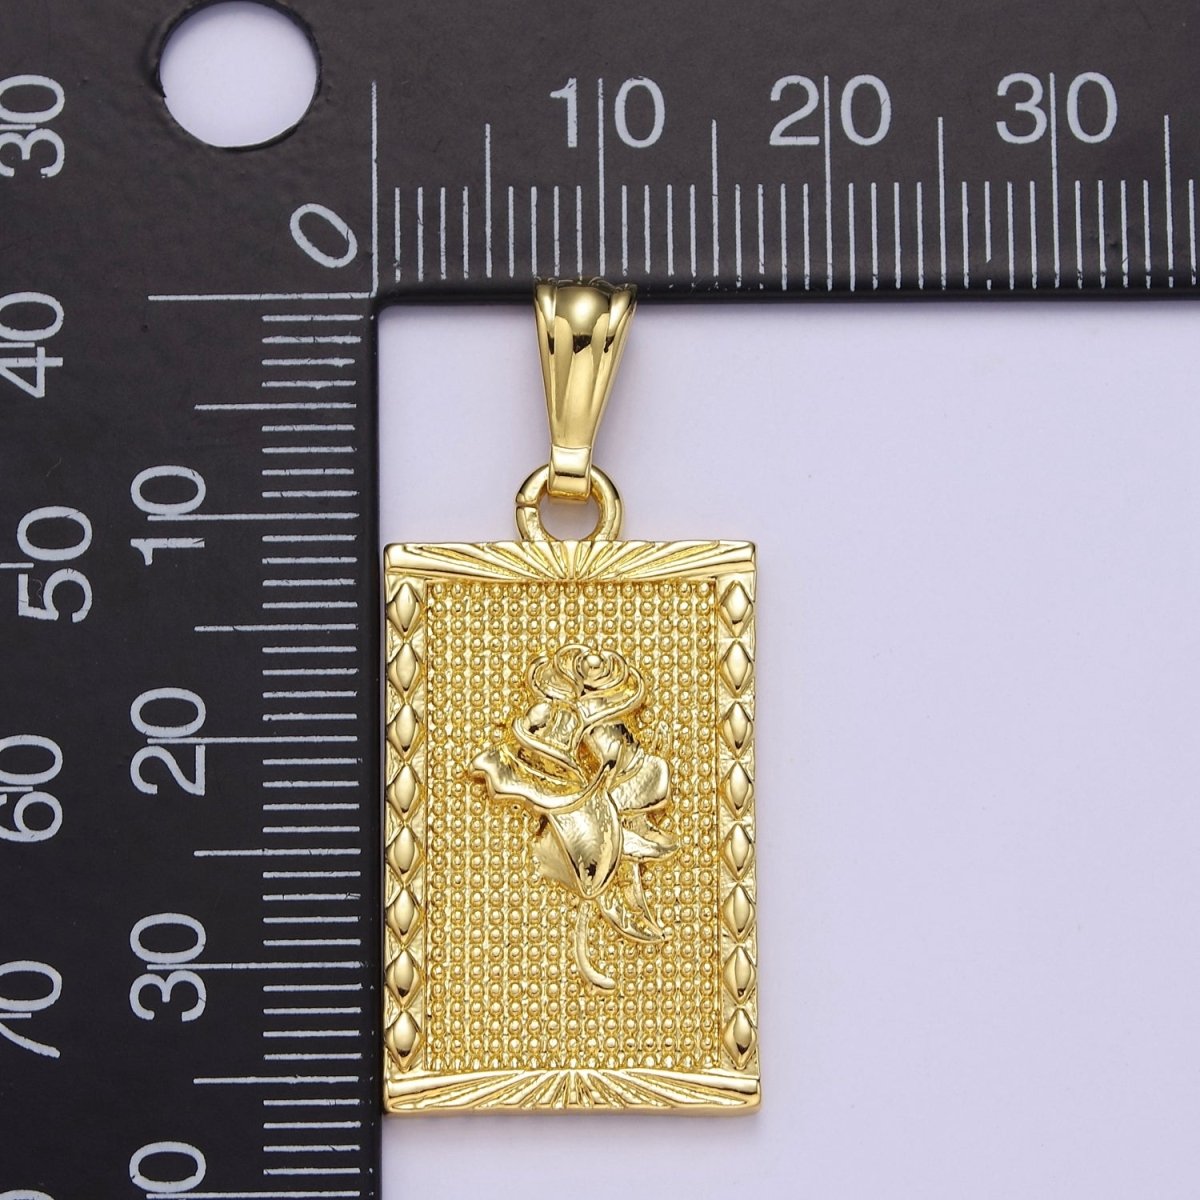 Gold Filled Rose Pendant, Dainty Gold Tag Necklace Bracelet Charm for DIY Jewelry Making Supply J-483 - DLUXCA